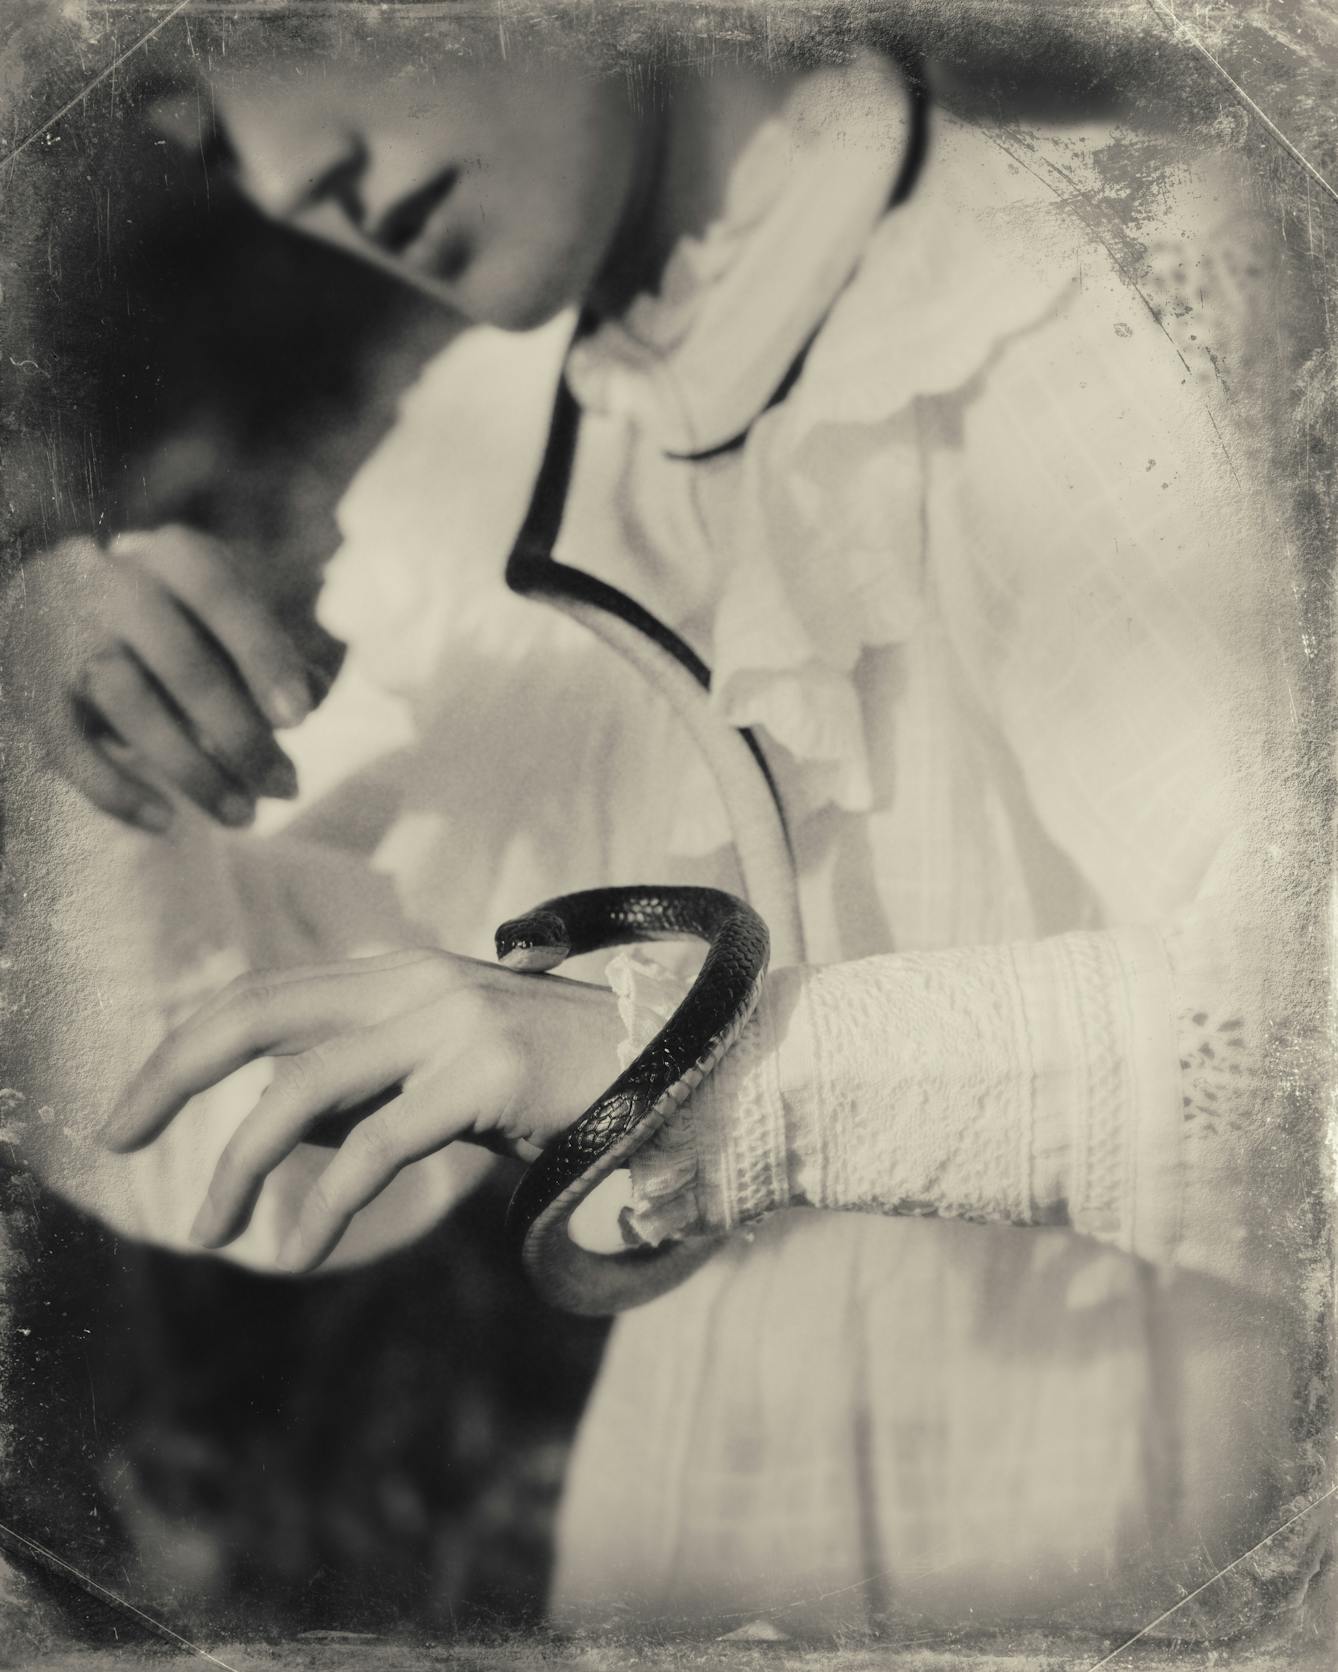 Sepia toned photograph with a digital filter applied to give the impression the photograph was created using a glass-plate process from the mid 19th century. The effect of this filter includes scratches and fingerprints. The photograph shows a close-up of a woman's torso. She is wearing a white blouse embellished with frills and large cuffs. Her left hand is raised in in front of her. Wrapped around her neck and running over her shoulder and down to her raised arm is a long darkly toned snake. The centre of the frame and the snake's head is in sharp focus, but the edges descend quickly into a blur.